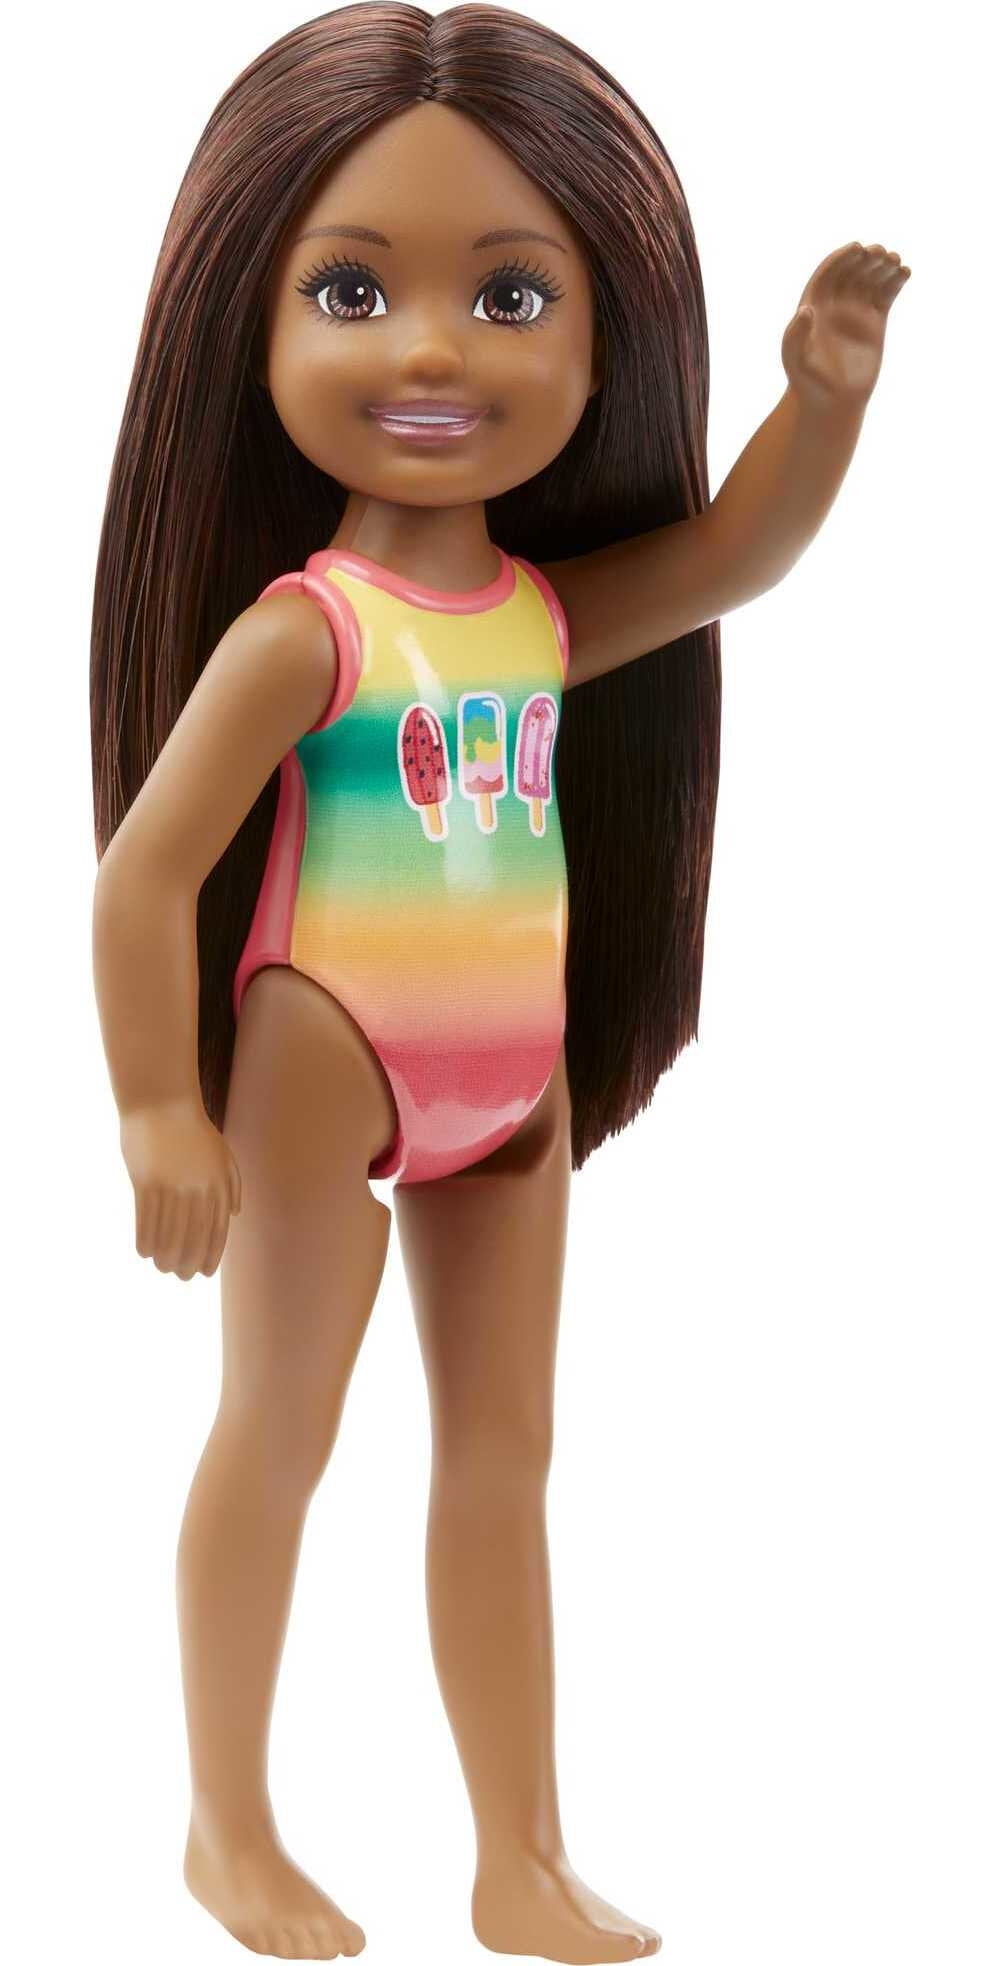 Barbie Club Chelsea Doll, Small Doll with Long Brown Hair, Brown Eyes & Frozen Treat-Graphic Swimsuit